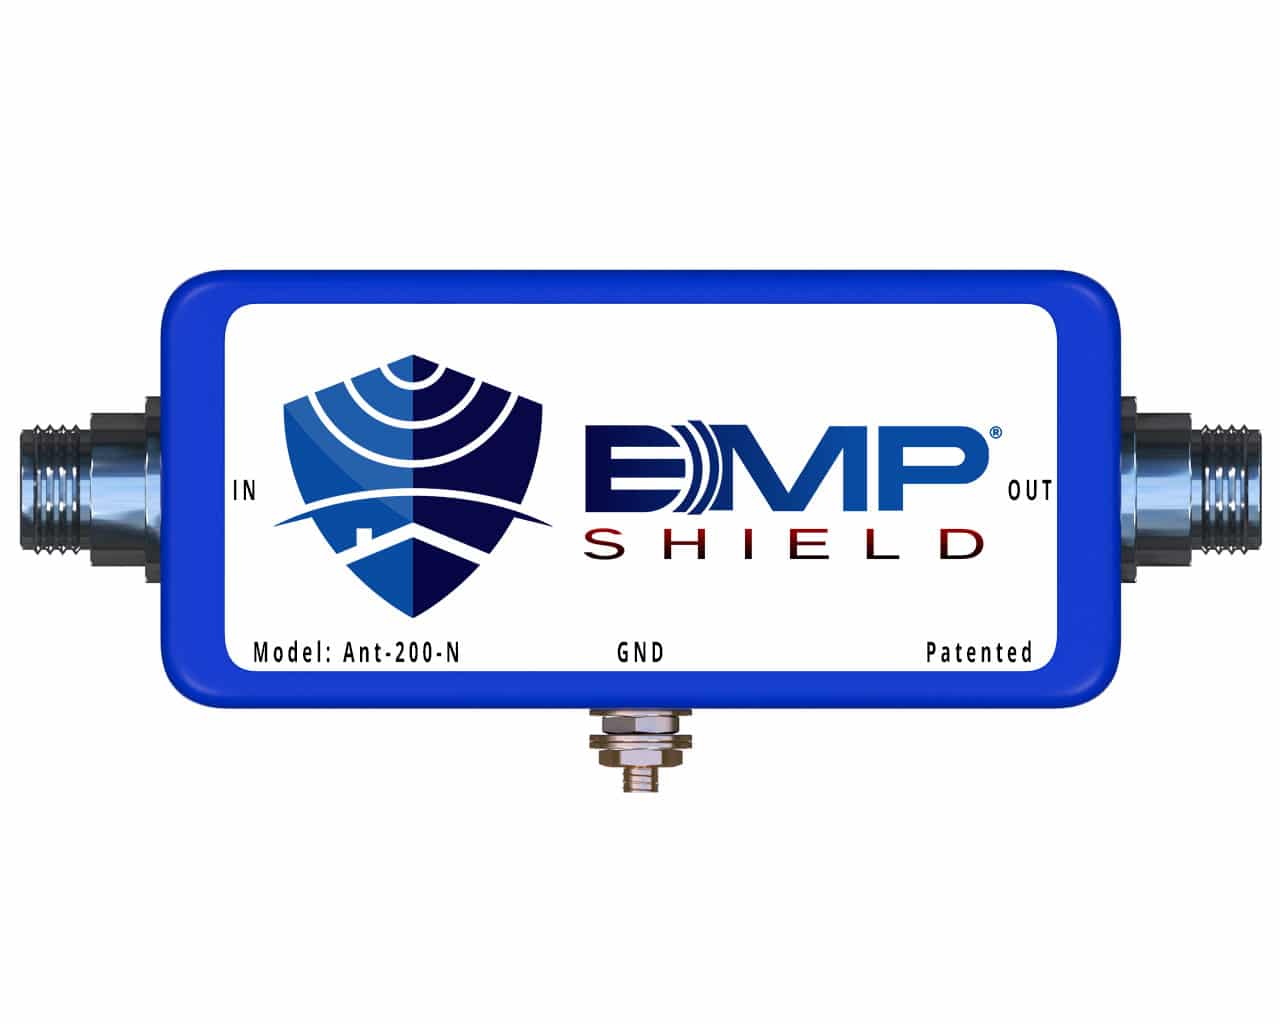 A blue box with the word bmp shield on it, offering EMP protection up to 200 Watts.